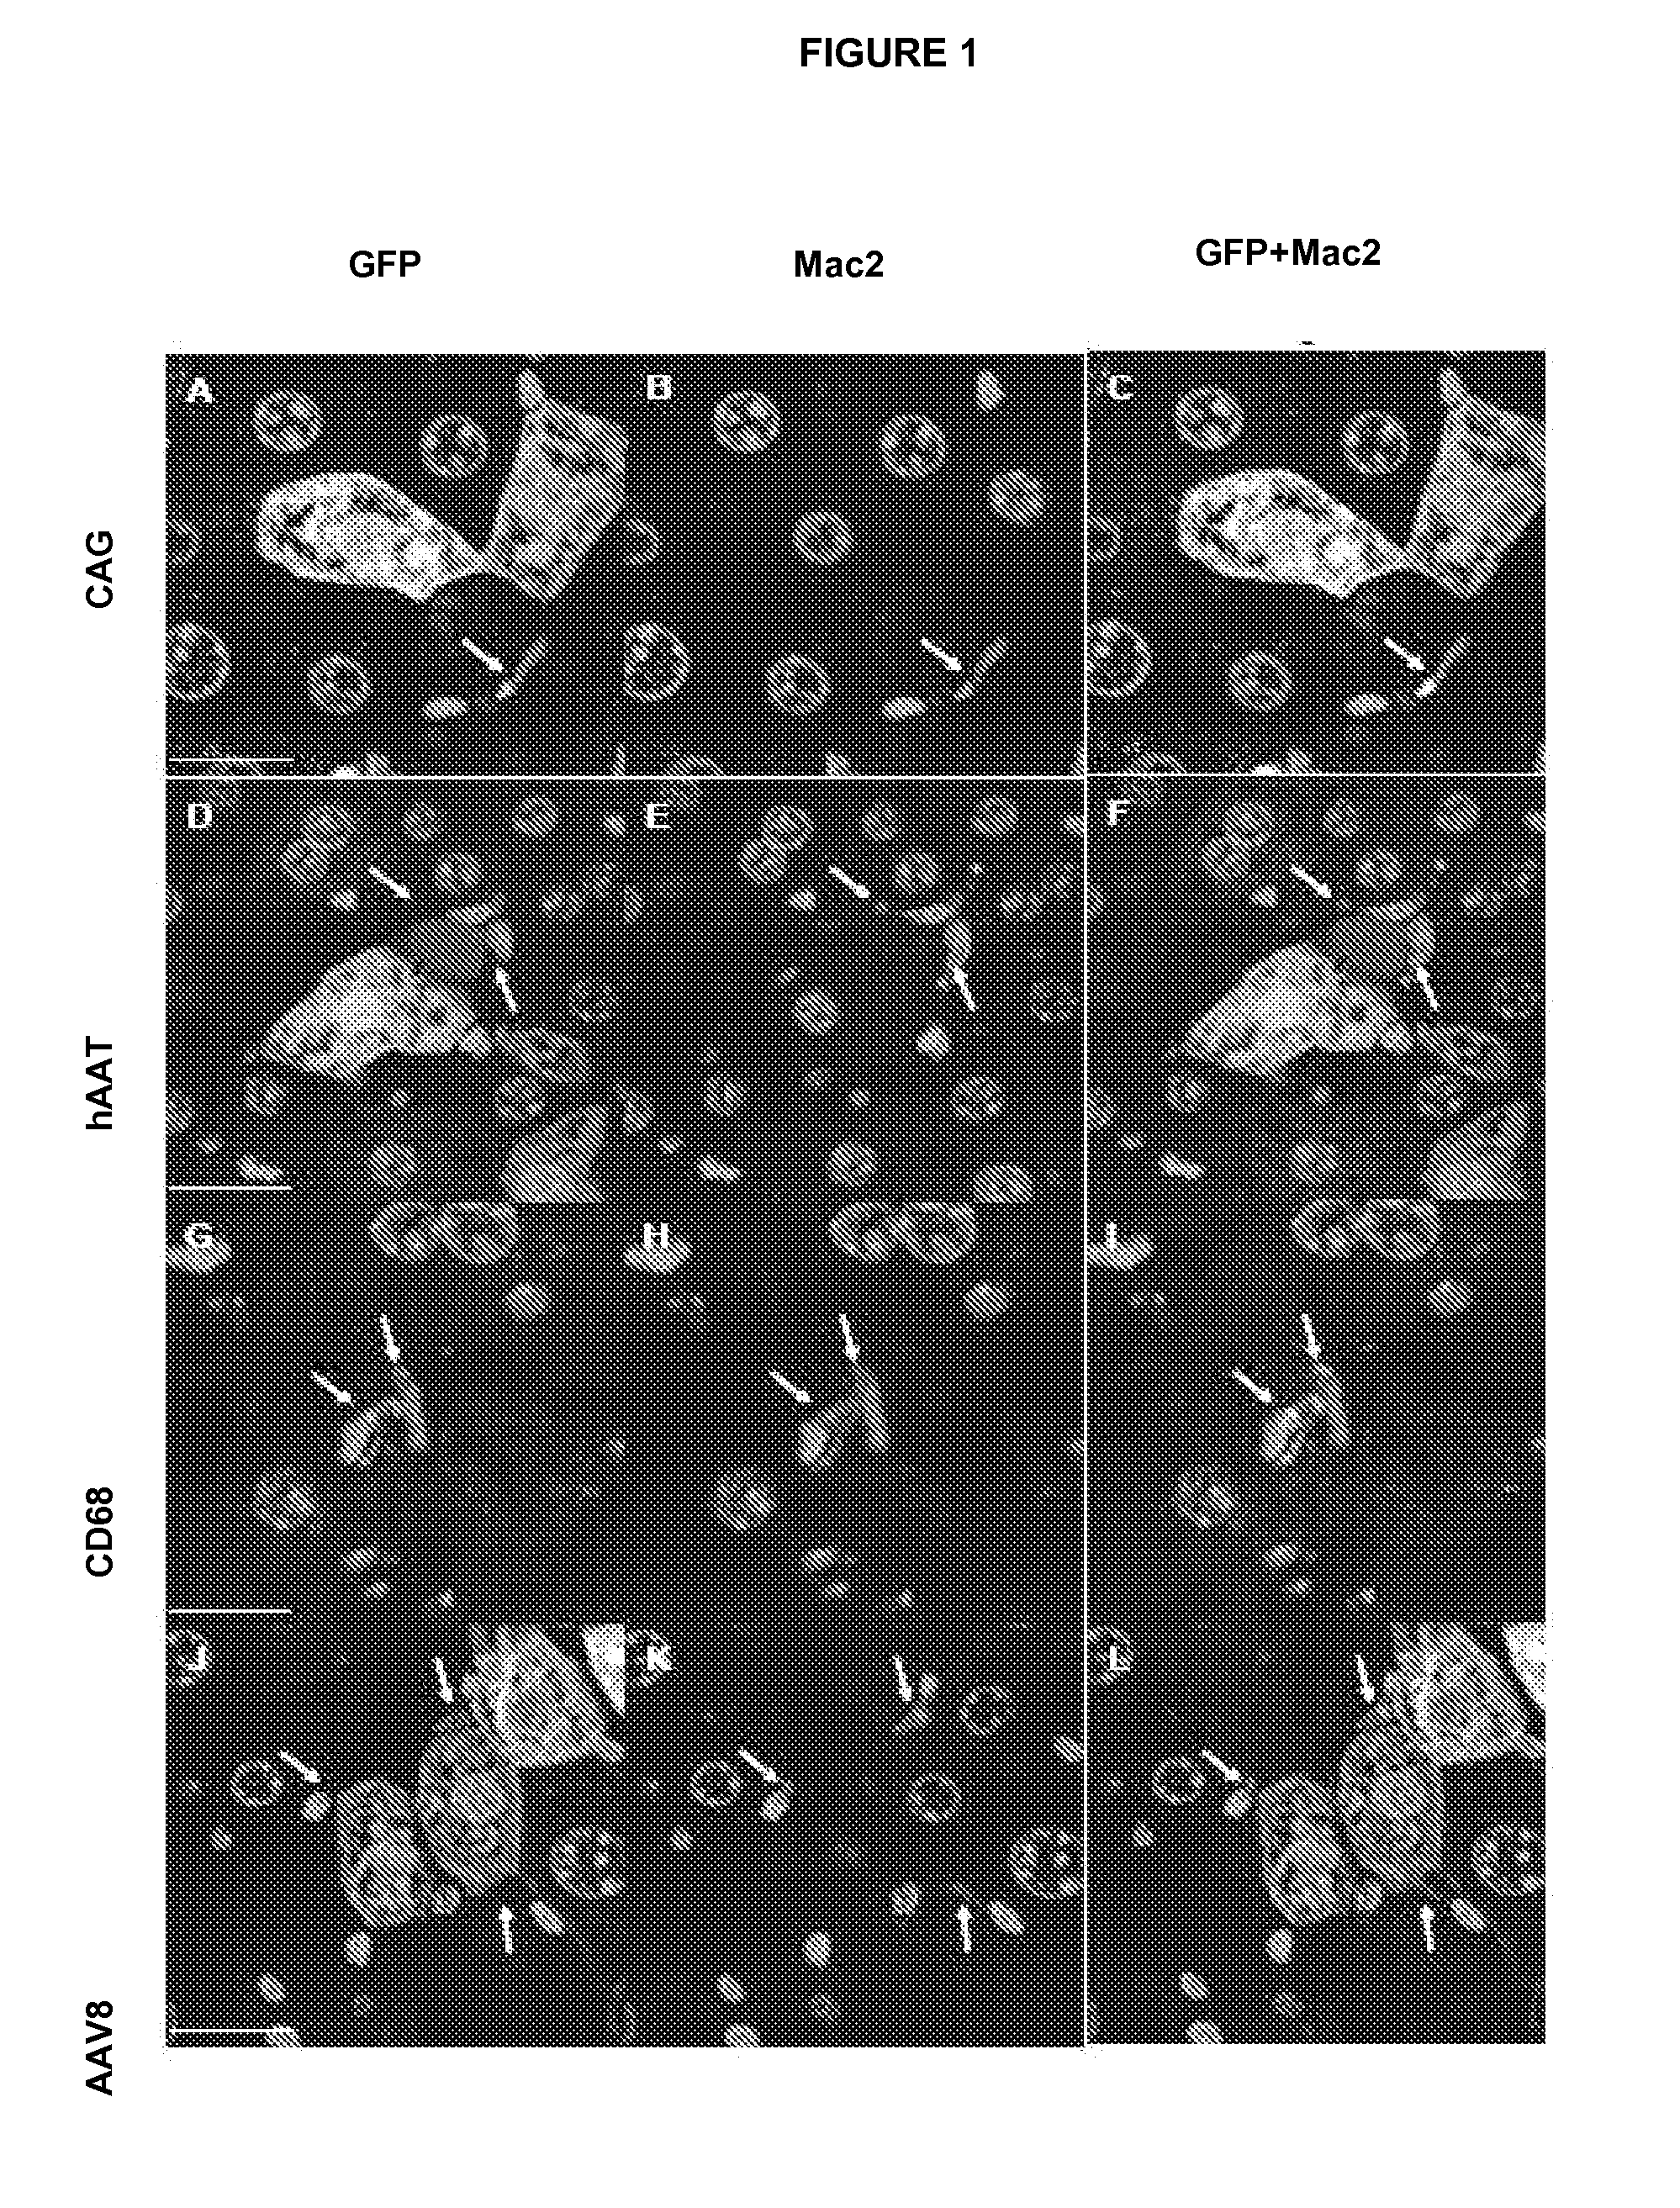 Gene therapy compositions for preventing and/or treating of autoimmune diseases